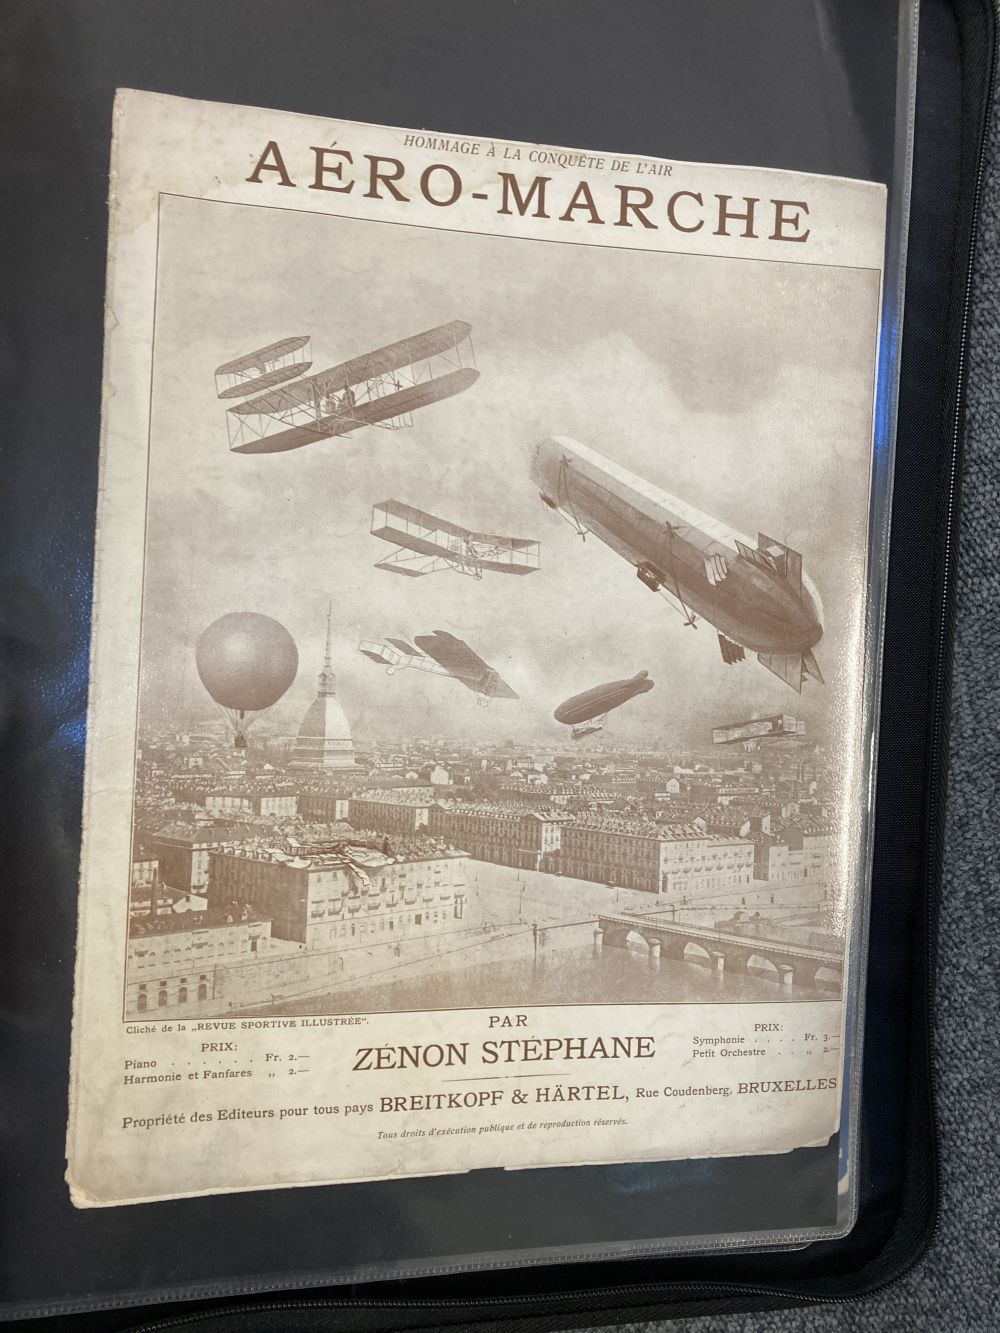 Sheet Music. Approx. 100 pieces of sheet music with an aviation theme, lmid 19th-early 20th c. - Image 11 of 17